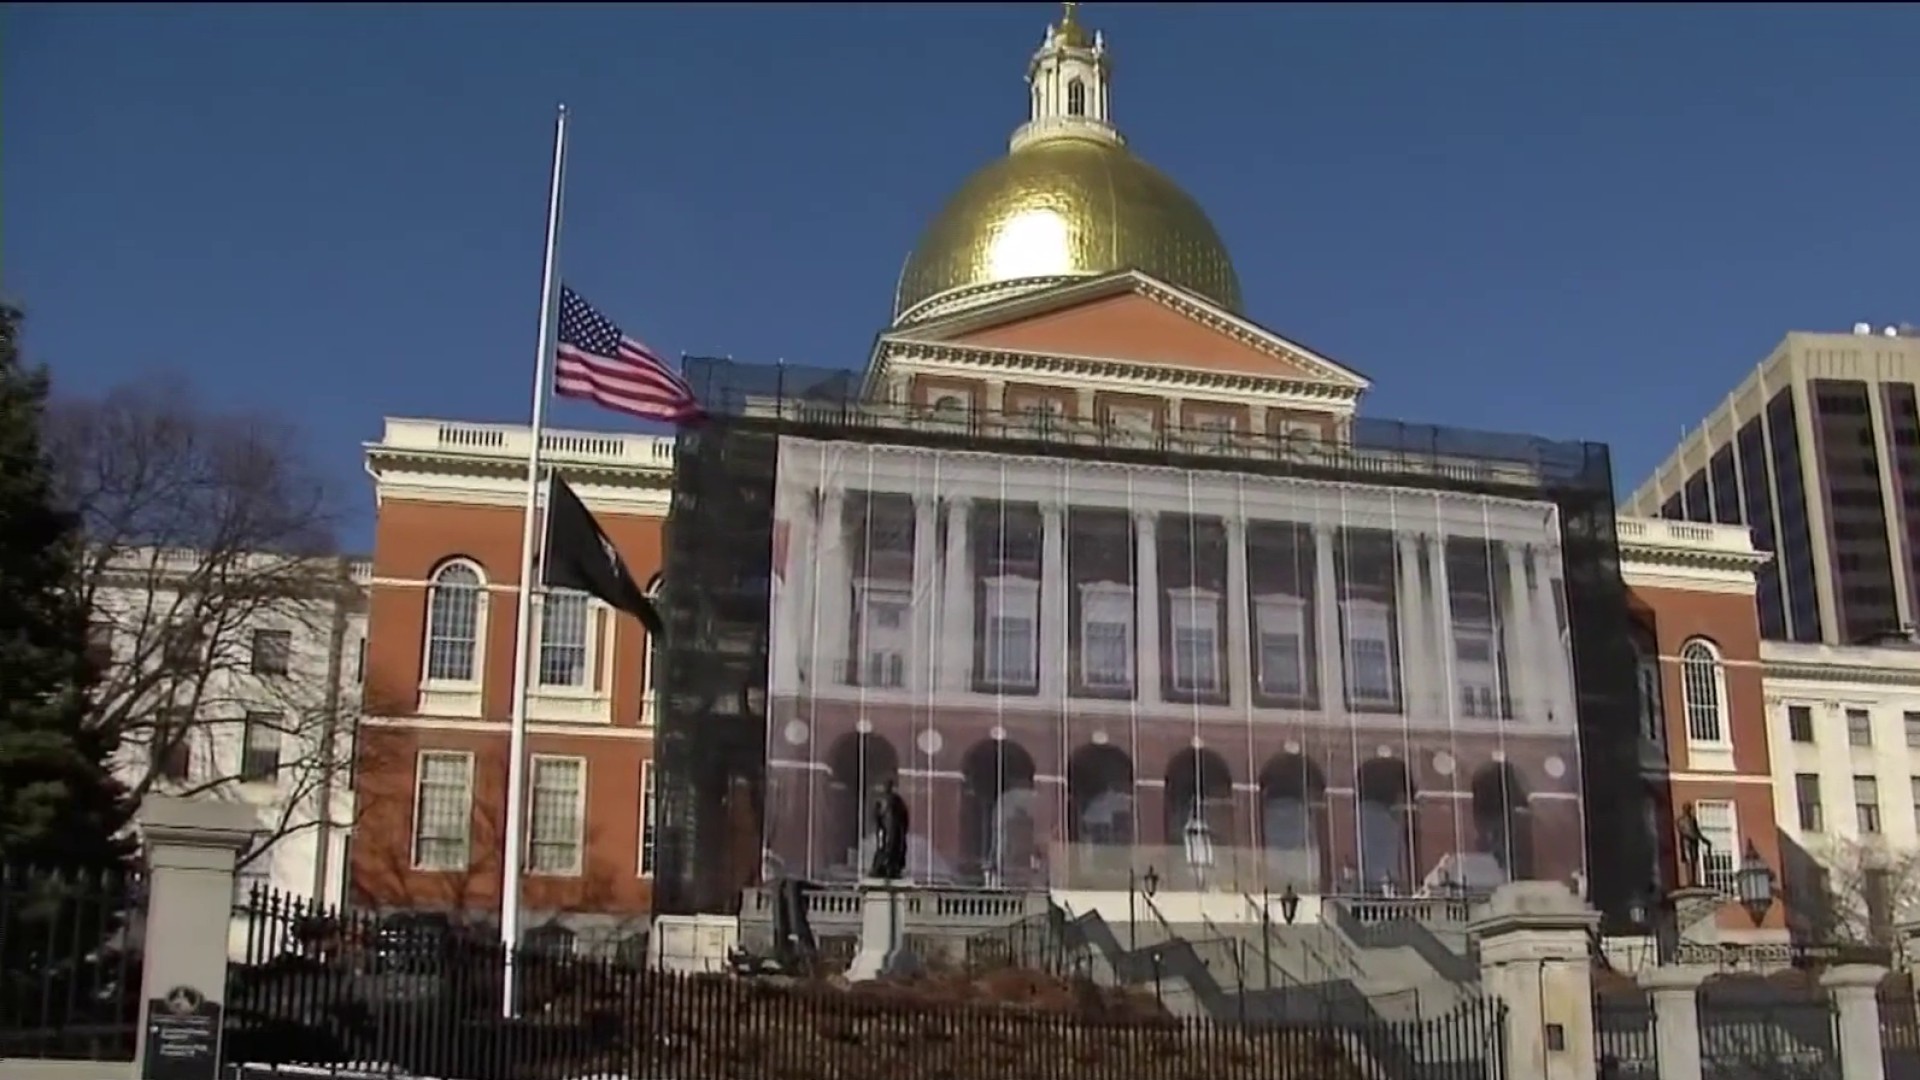 New Massachusetts law expands driver's license eligibility to undocumented  immigrants – Boston 25 News